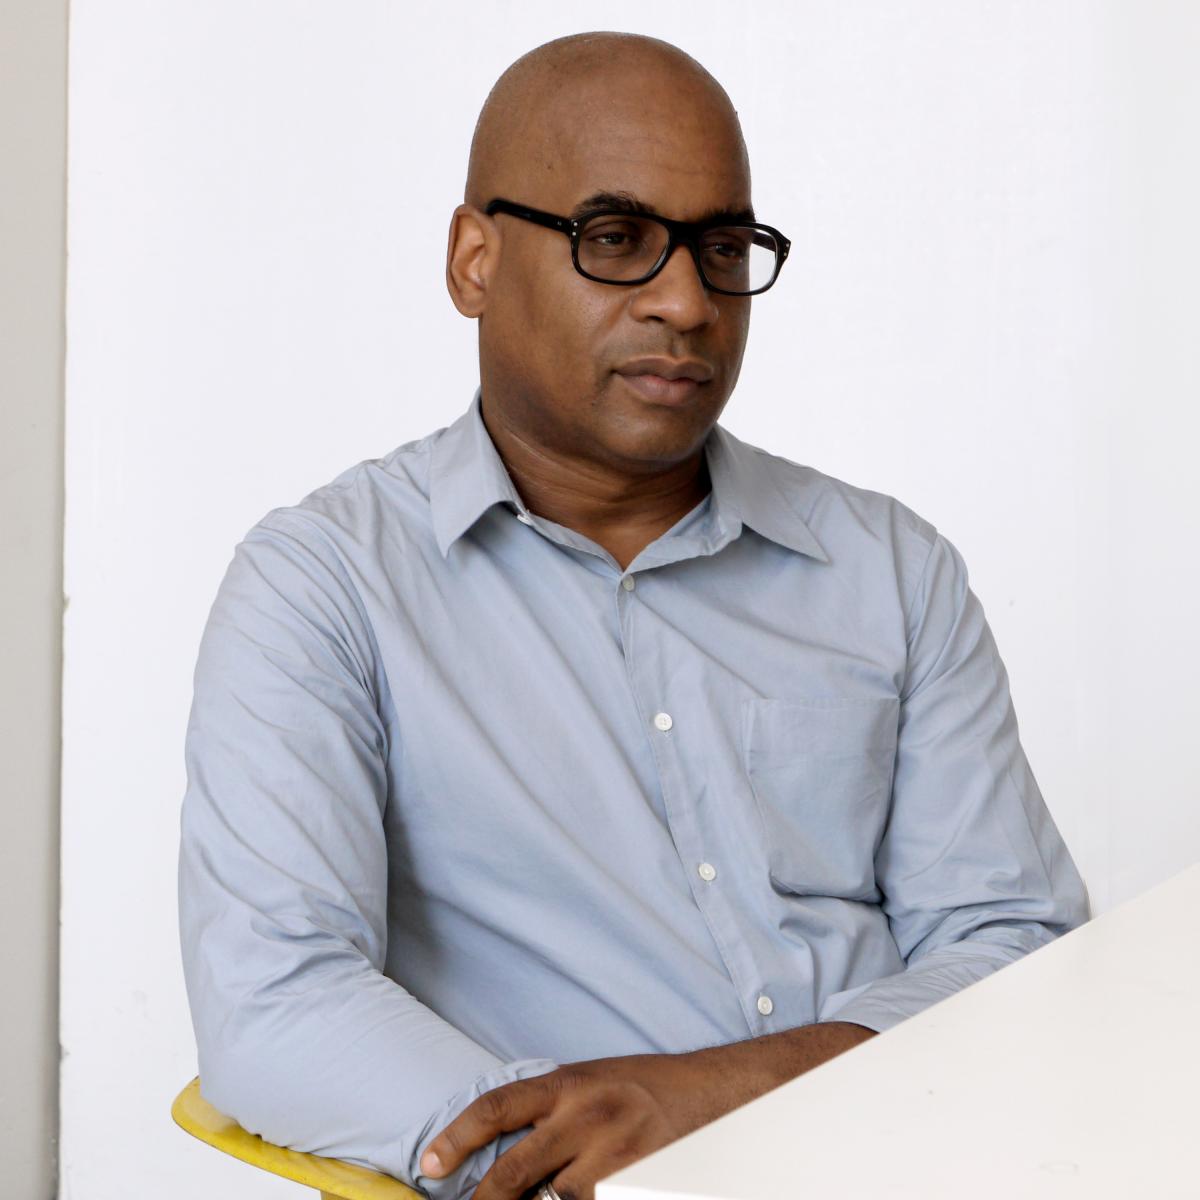 A photo of a dark-skinned bald man in three quarter profile. He is wearing a light blue button down shirt and black frame glasses.